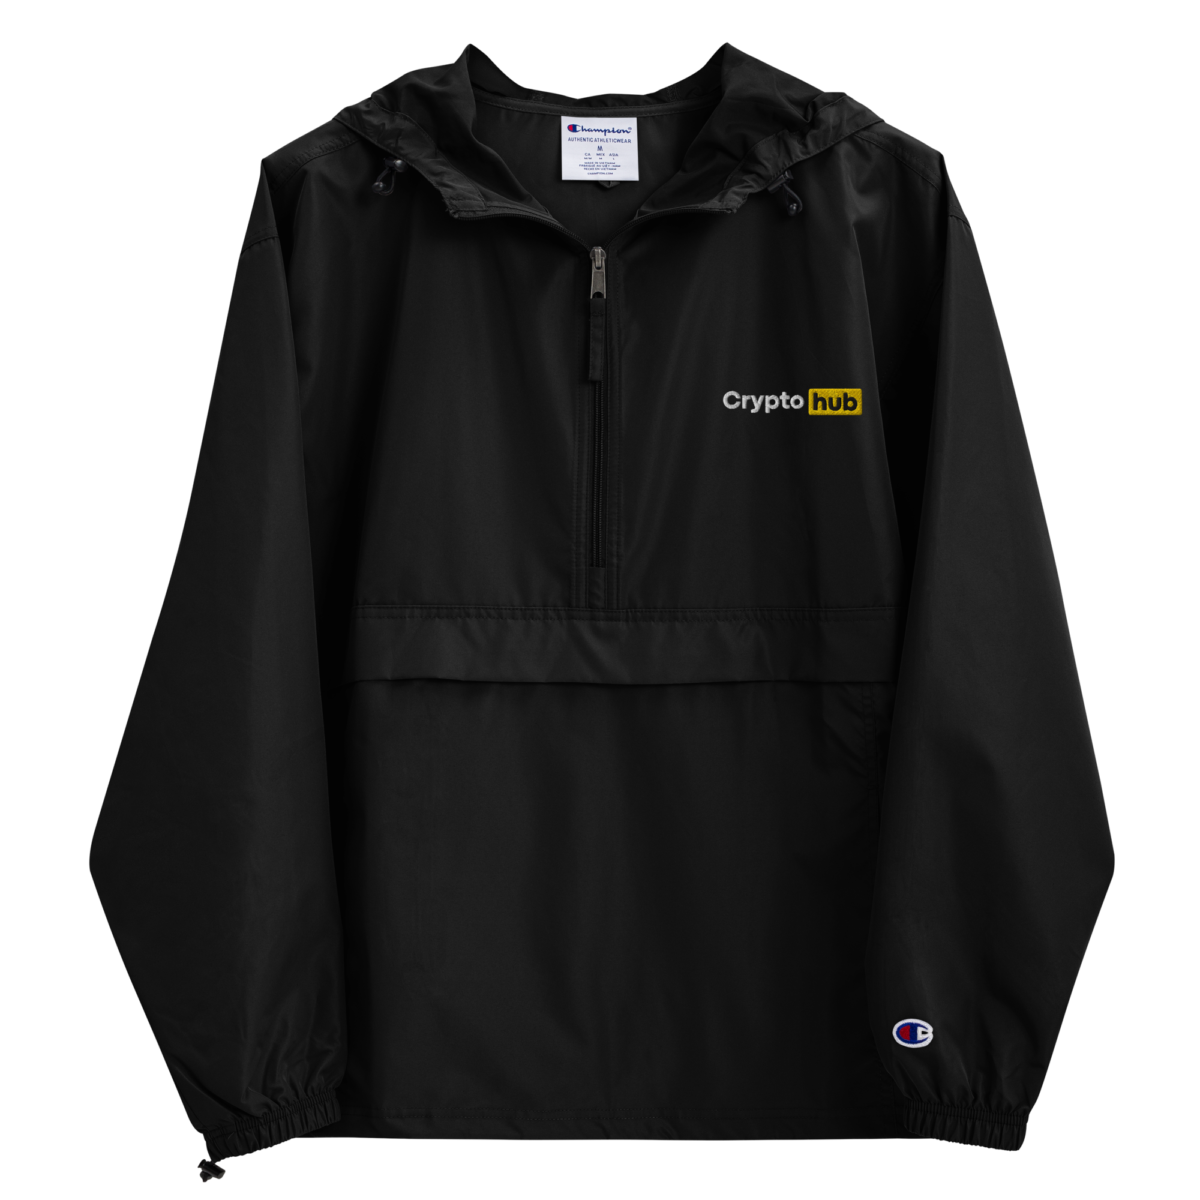 embroidered champion packable jacket black front 631f4496a6a39 - Crypto Hub Champion Packable Jacket